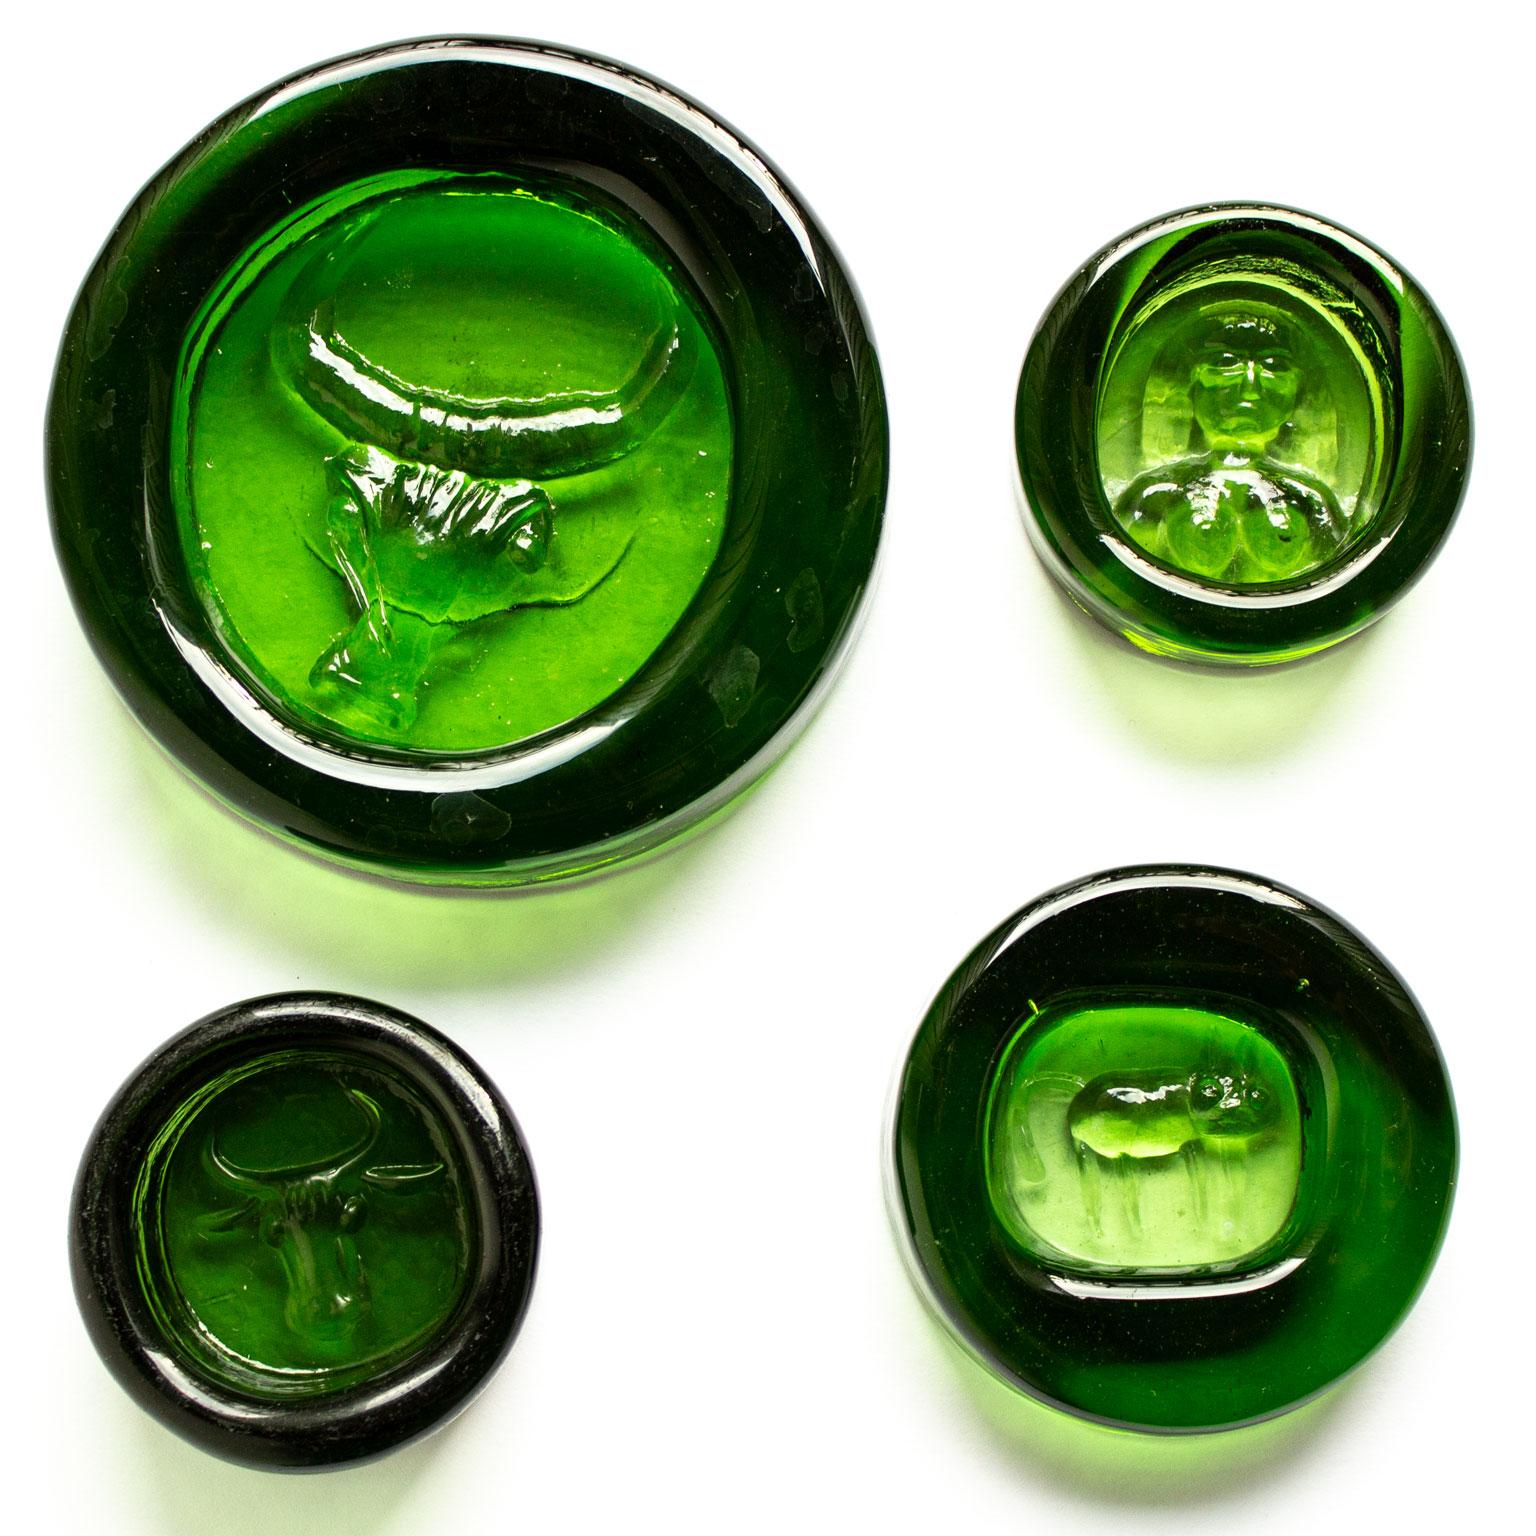 Scandinavian Modern 13 glass pieces by the Swedish Enfant Terrible Erik Höglund for Boda. Between 7-14 cm diameter. These pieces can be displayed as sculptures in a window or used as plates for herbs or salt.

Erik Höglund developed his own